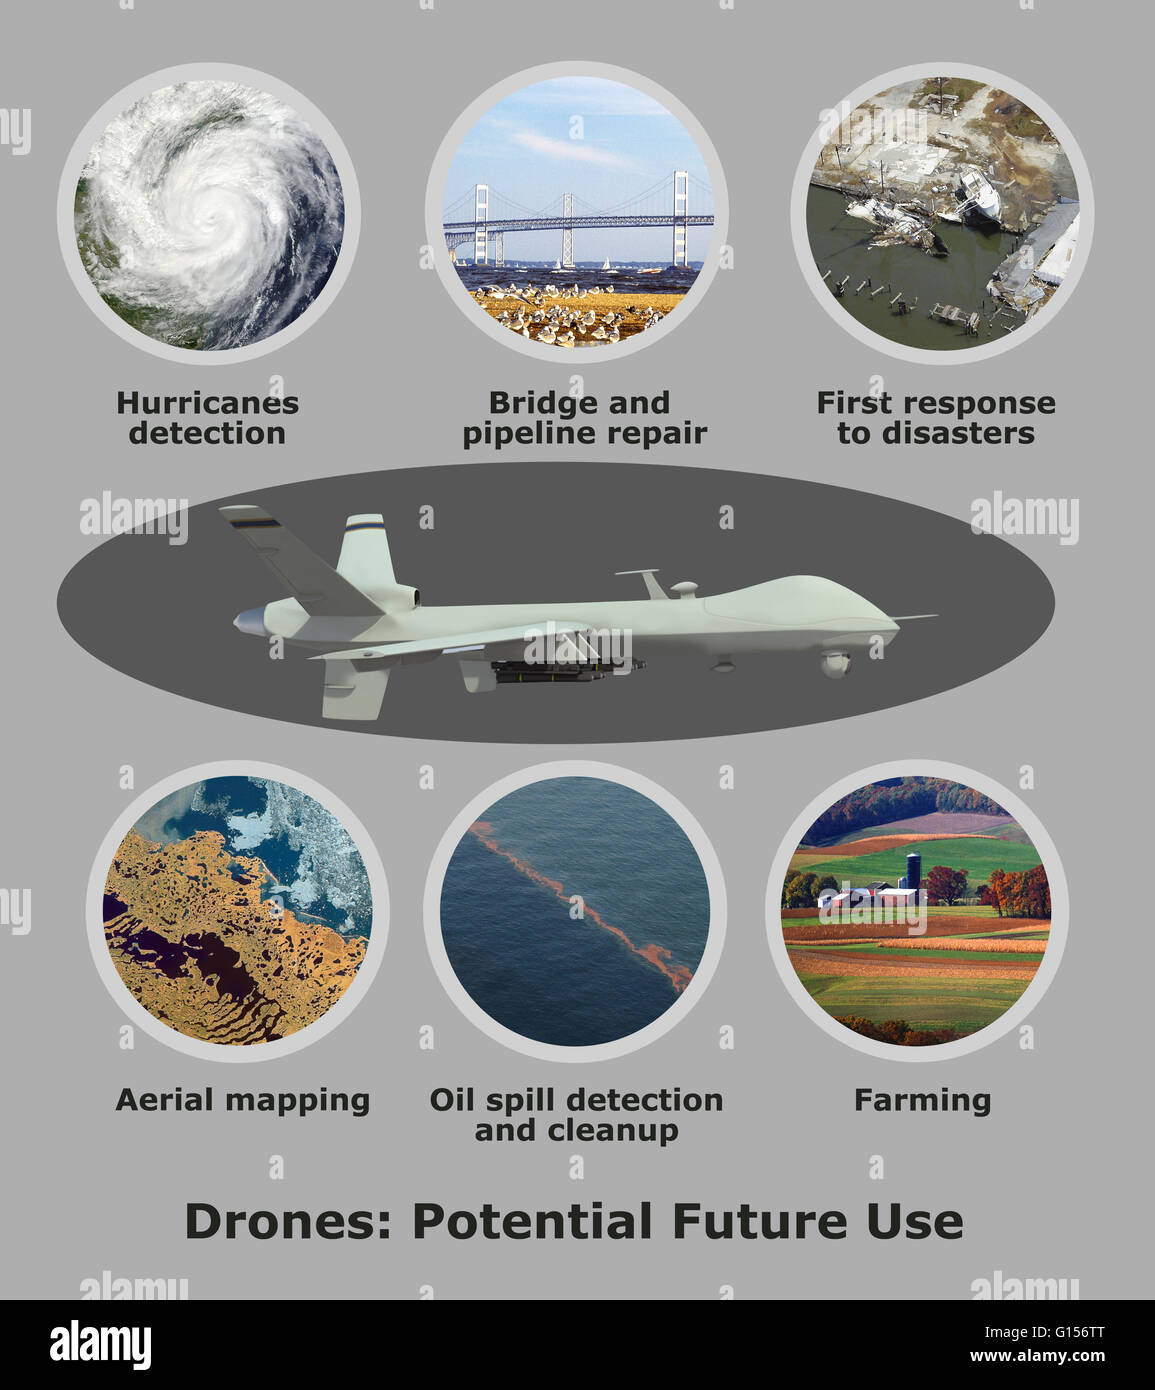 Illustration showing the potential benefits of drone usage in the future. Stock Photo